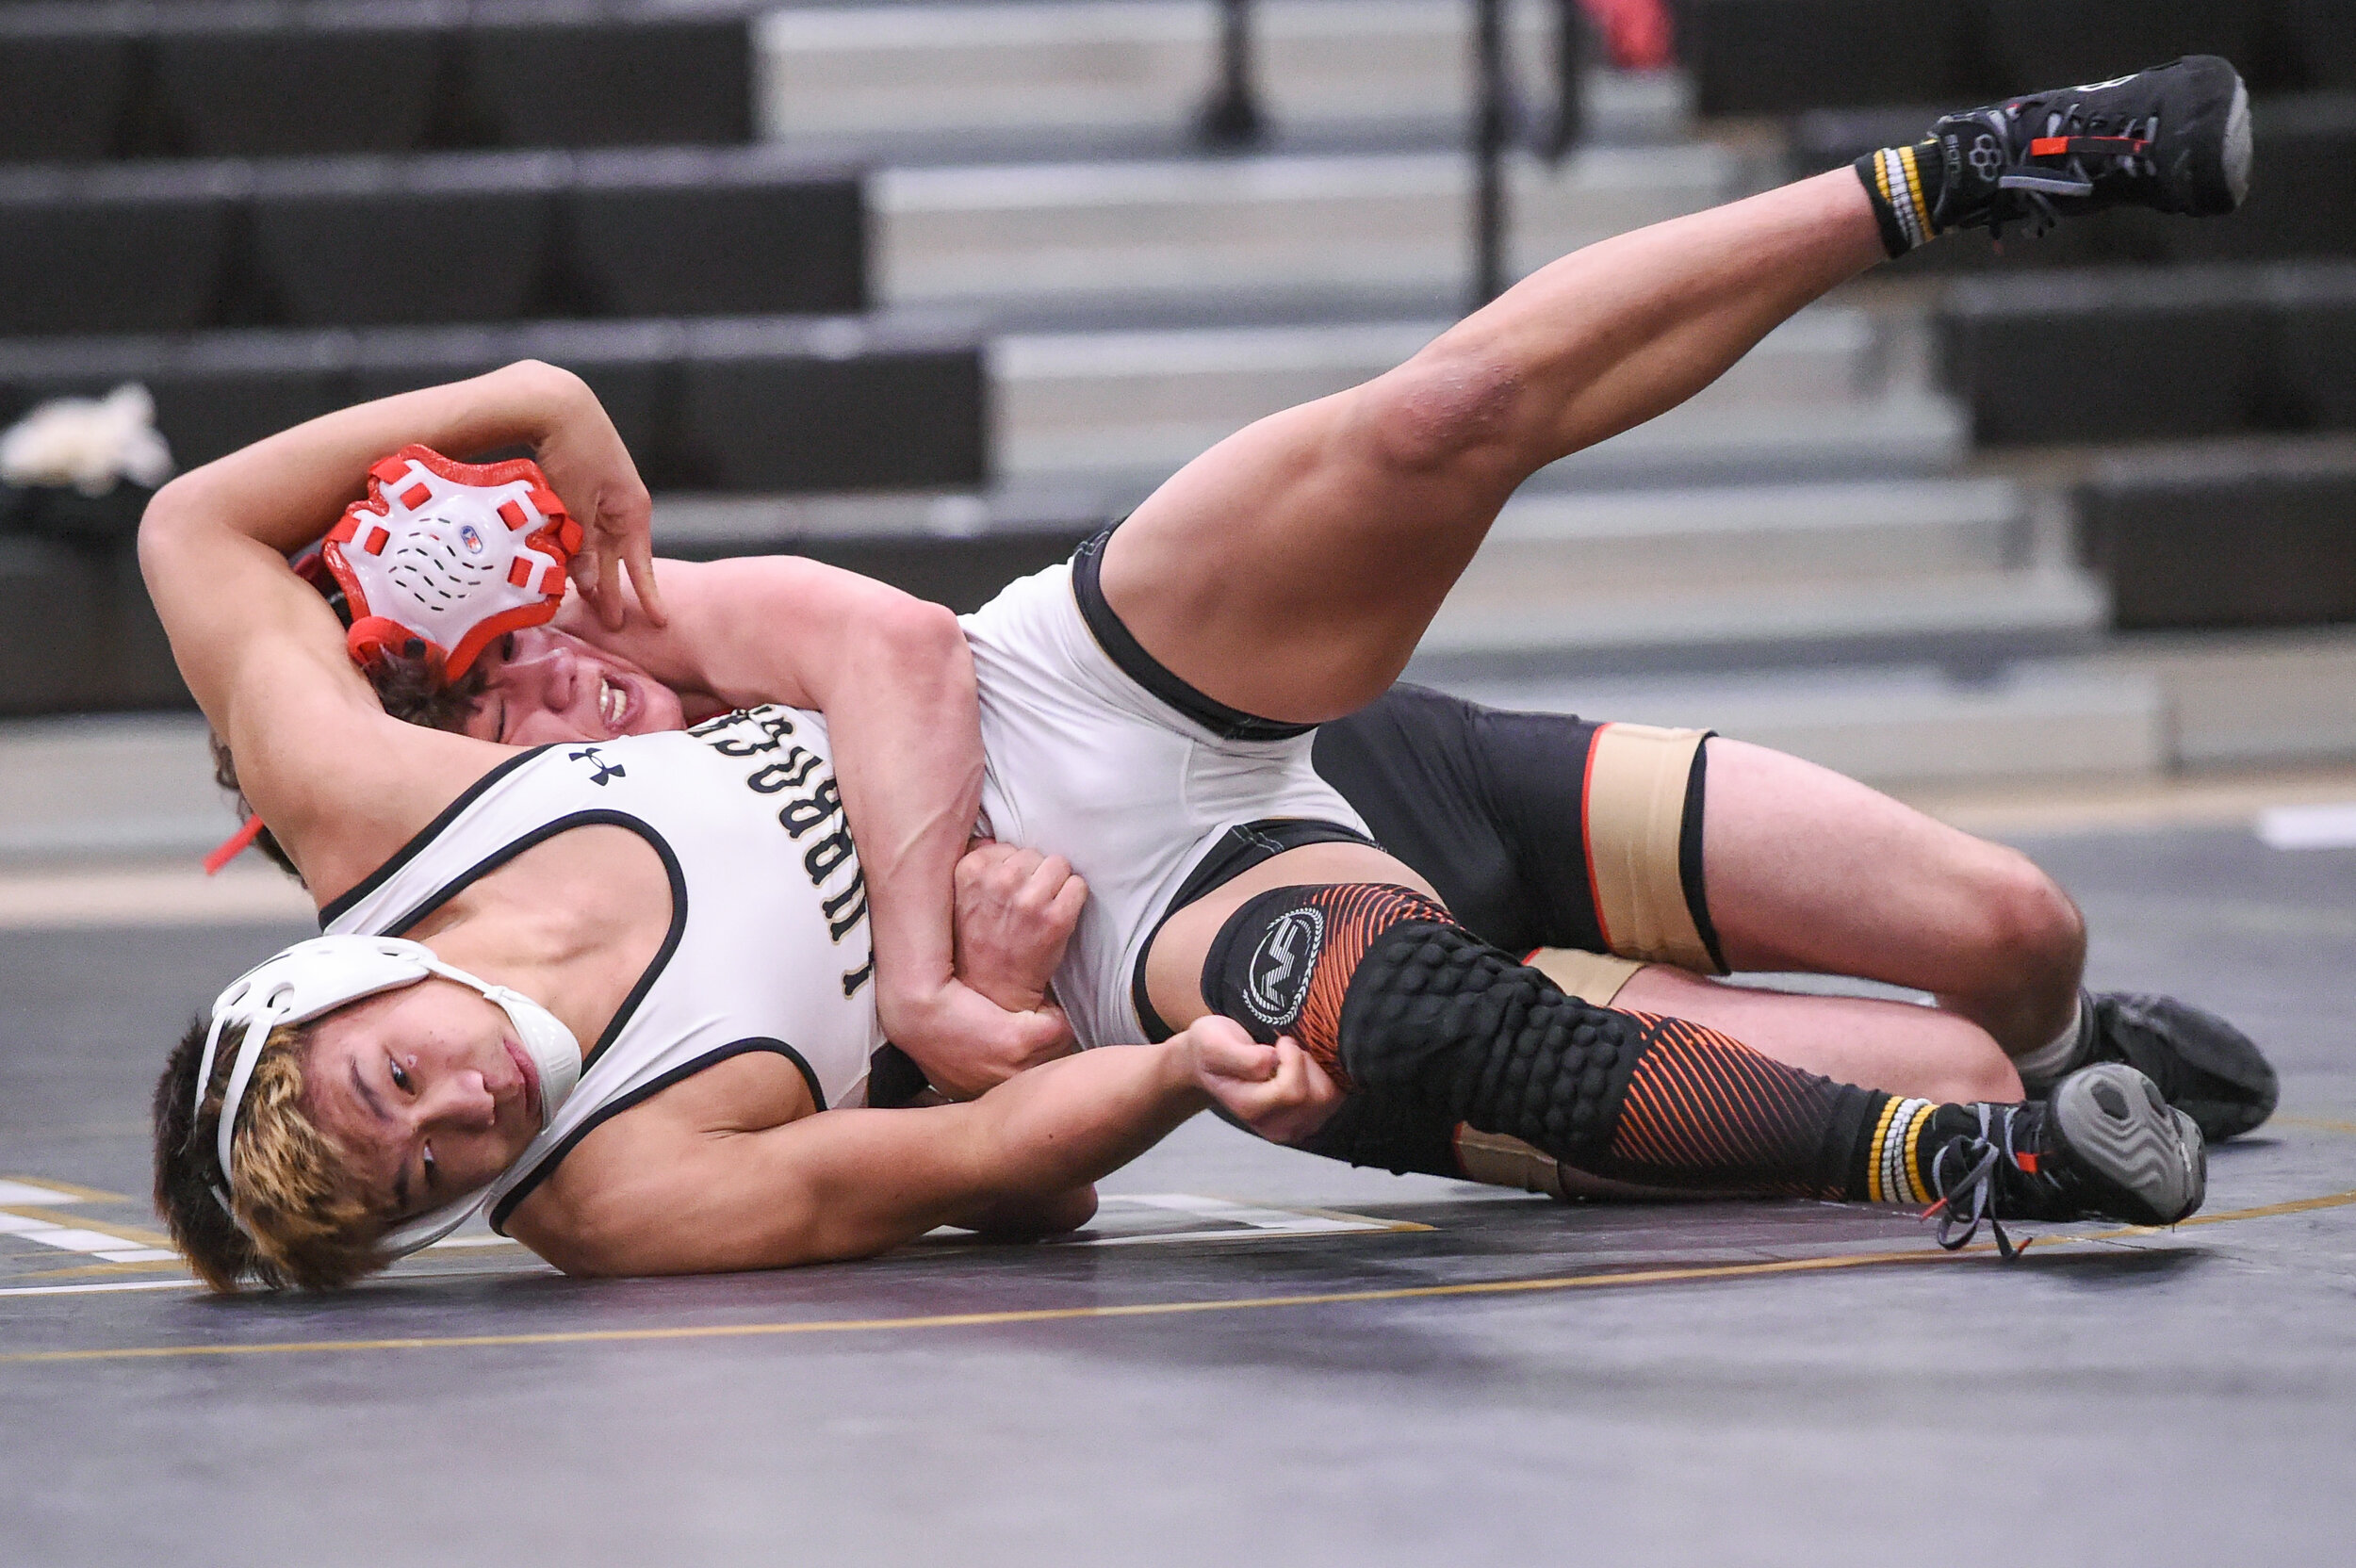  Lubbock High School hosted Coronado and Monterey in a wrestling tournament on Wednesday, March 17, 2021, at Lubbock High School in Lubbock, Texas.  